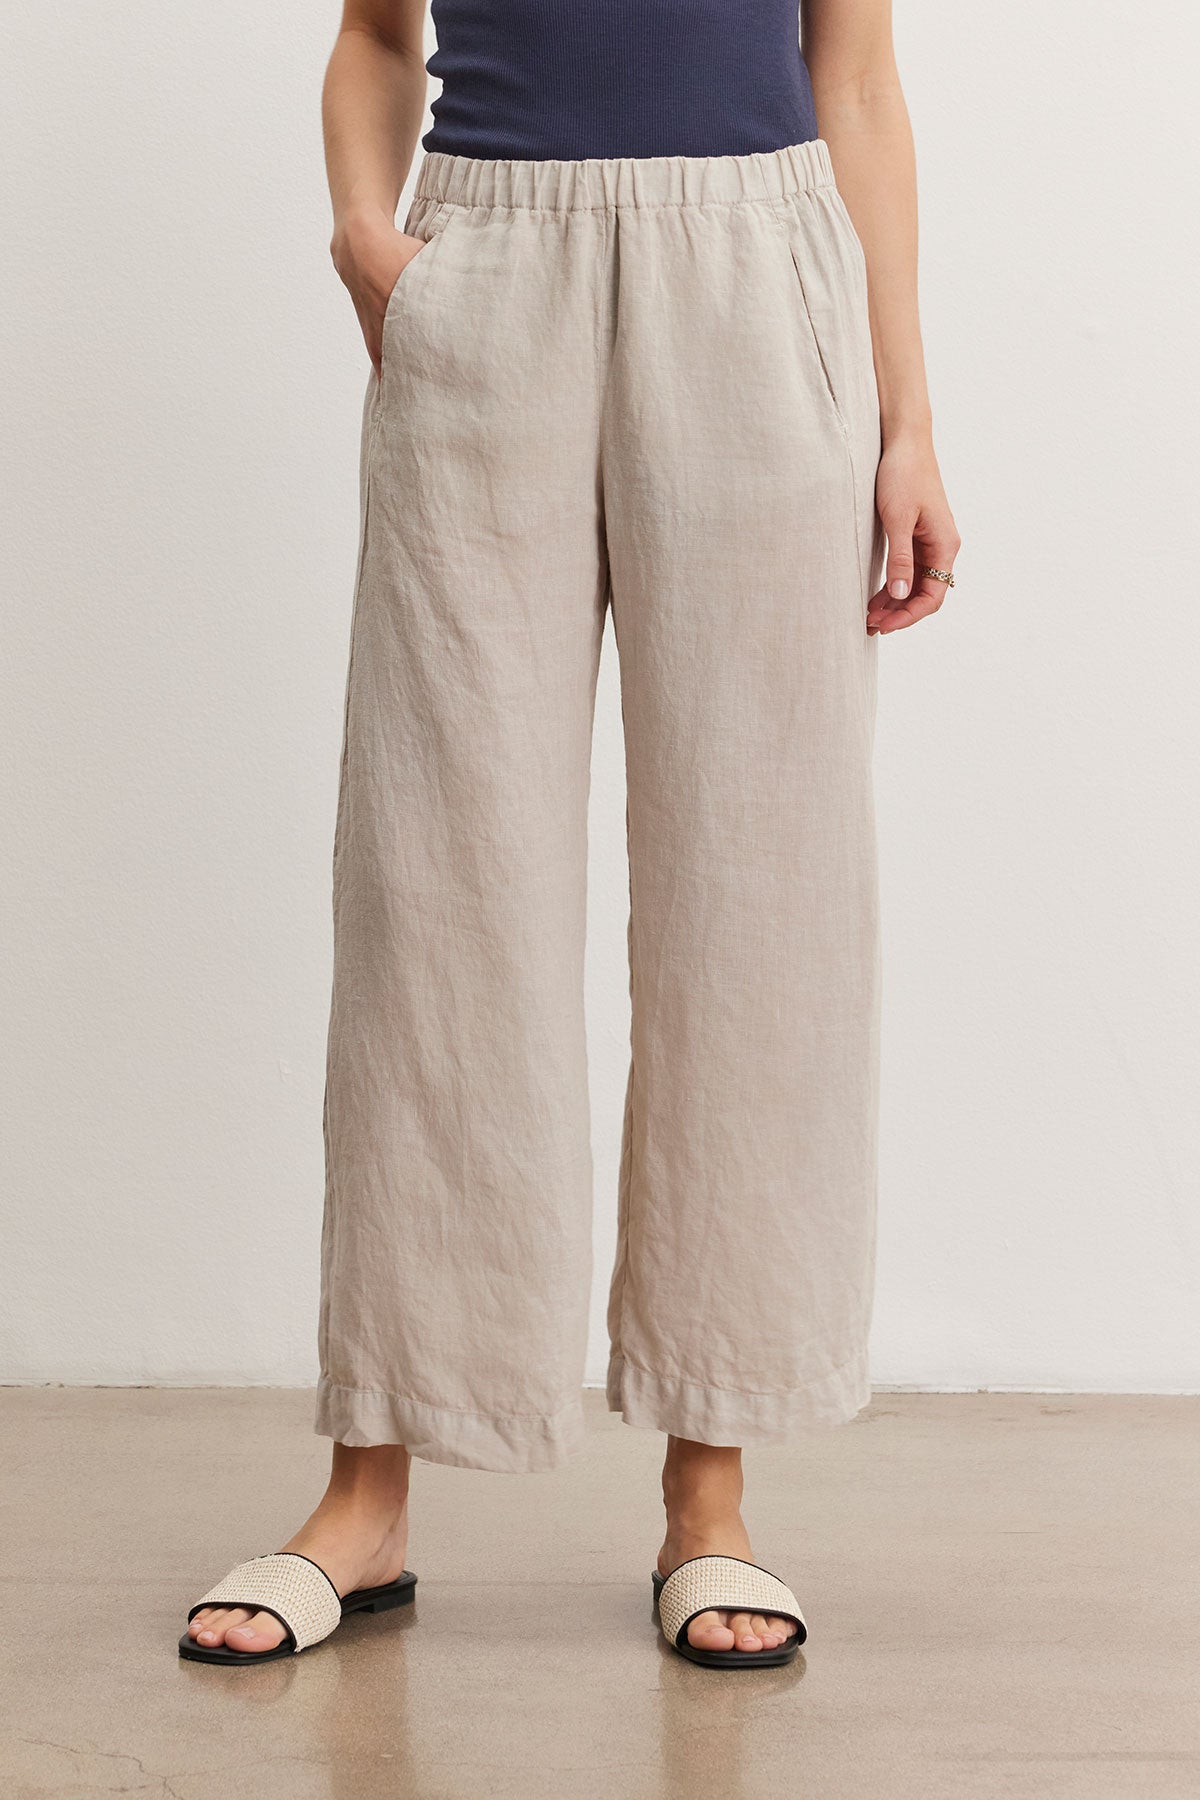 A person wearing light beige LOLA LINEN PANT by Velvet by Graham & Spencer, relaxed leg pants with hands in pockets, a dark blue top, and light-colored slip-on sandals.-36998848348353